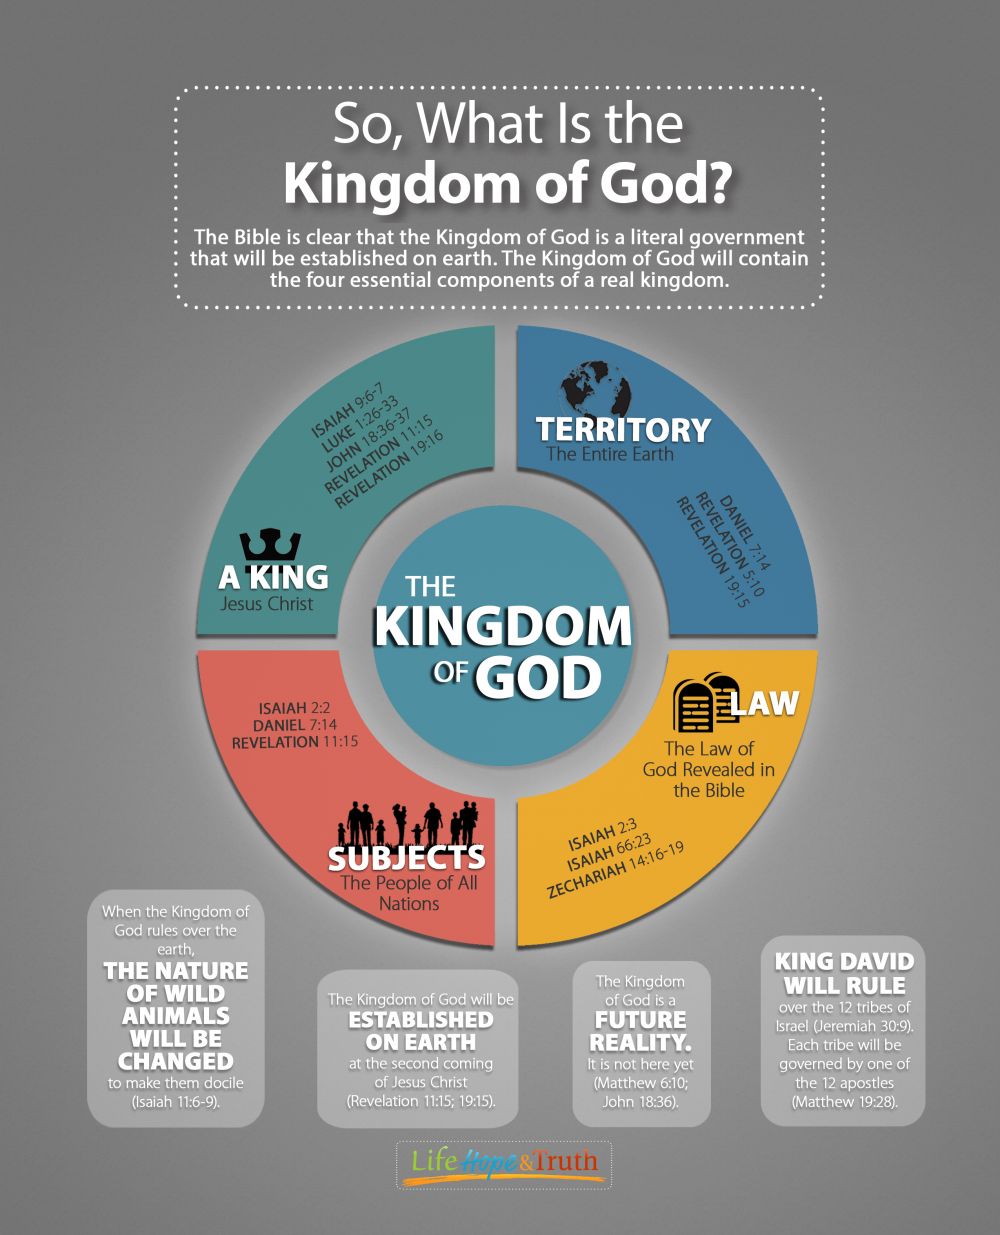 So, What Is the Kingdom of God